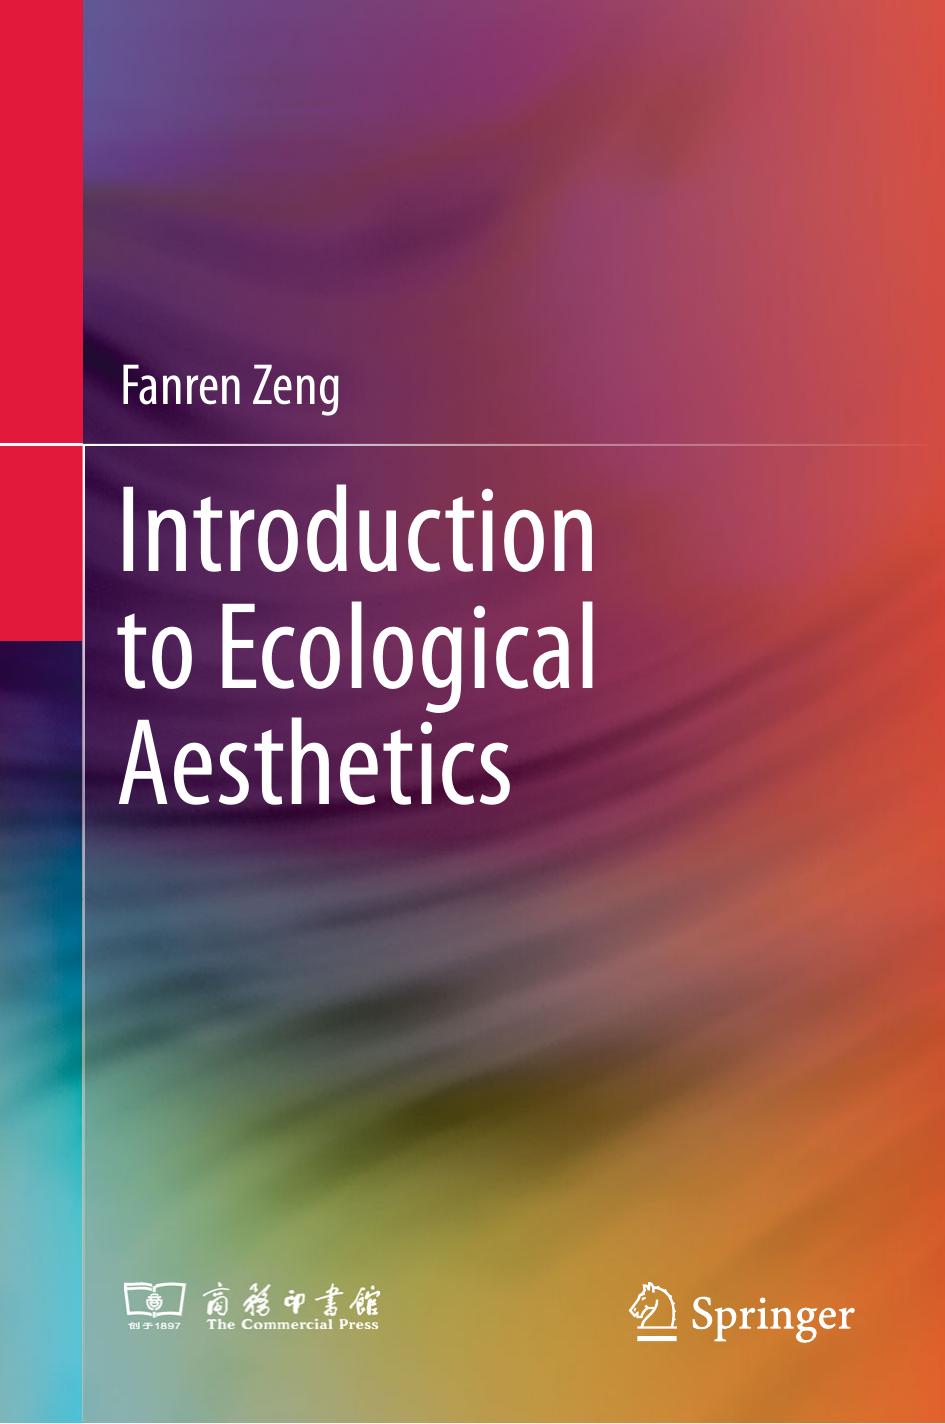 Introduction to Ecological Aesthetics by Fanren Zeng